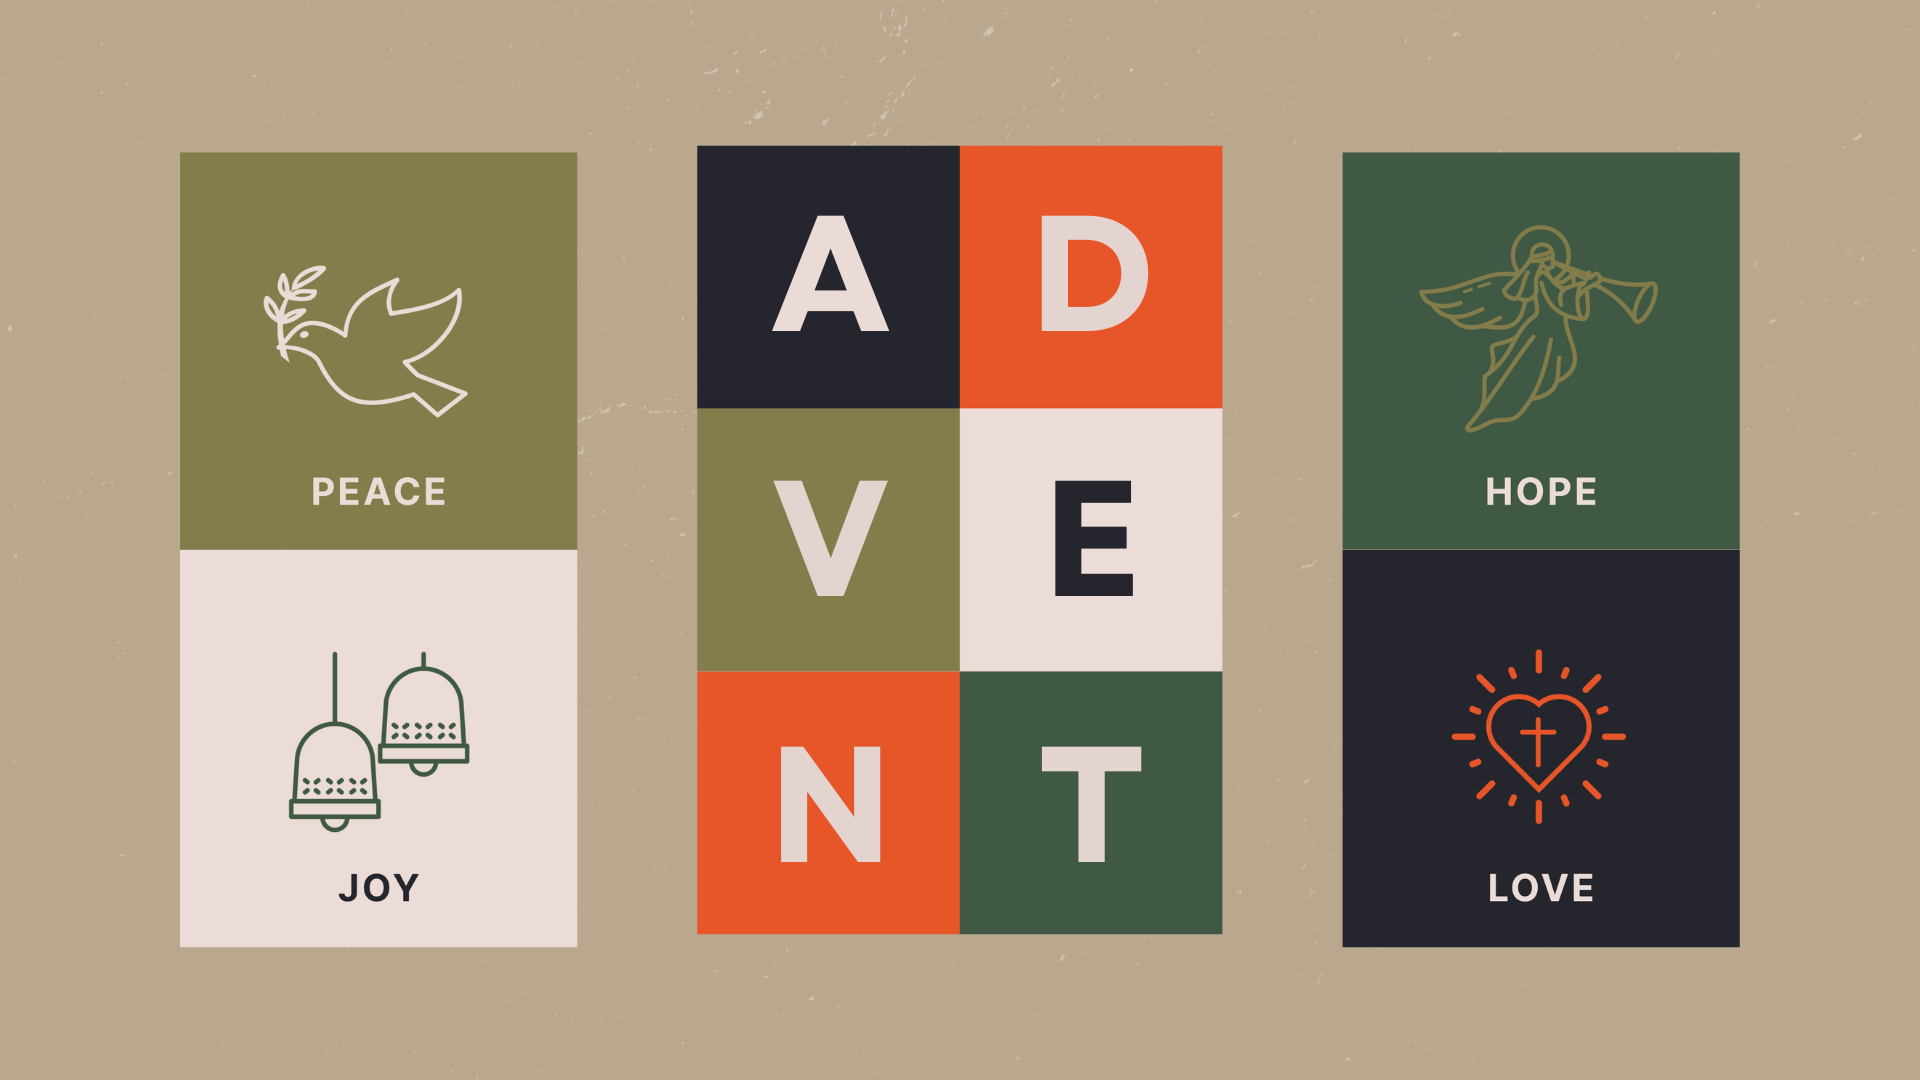 Advent 4K 3840 × 2160 Px | Remix Church Media | Editable Design Templates And Resources Made For The Church.